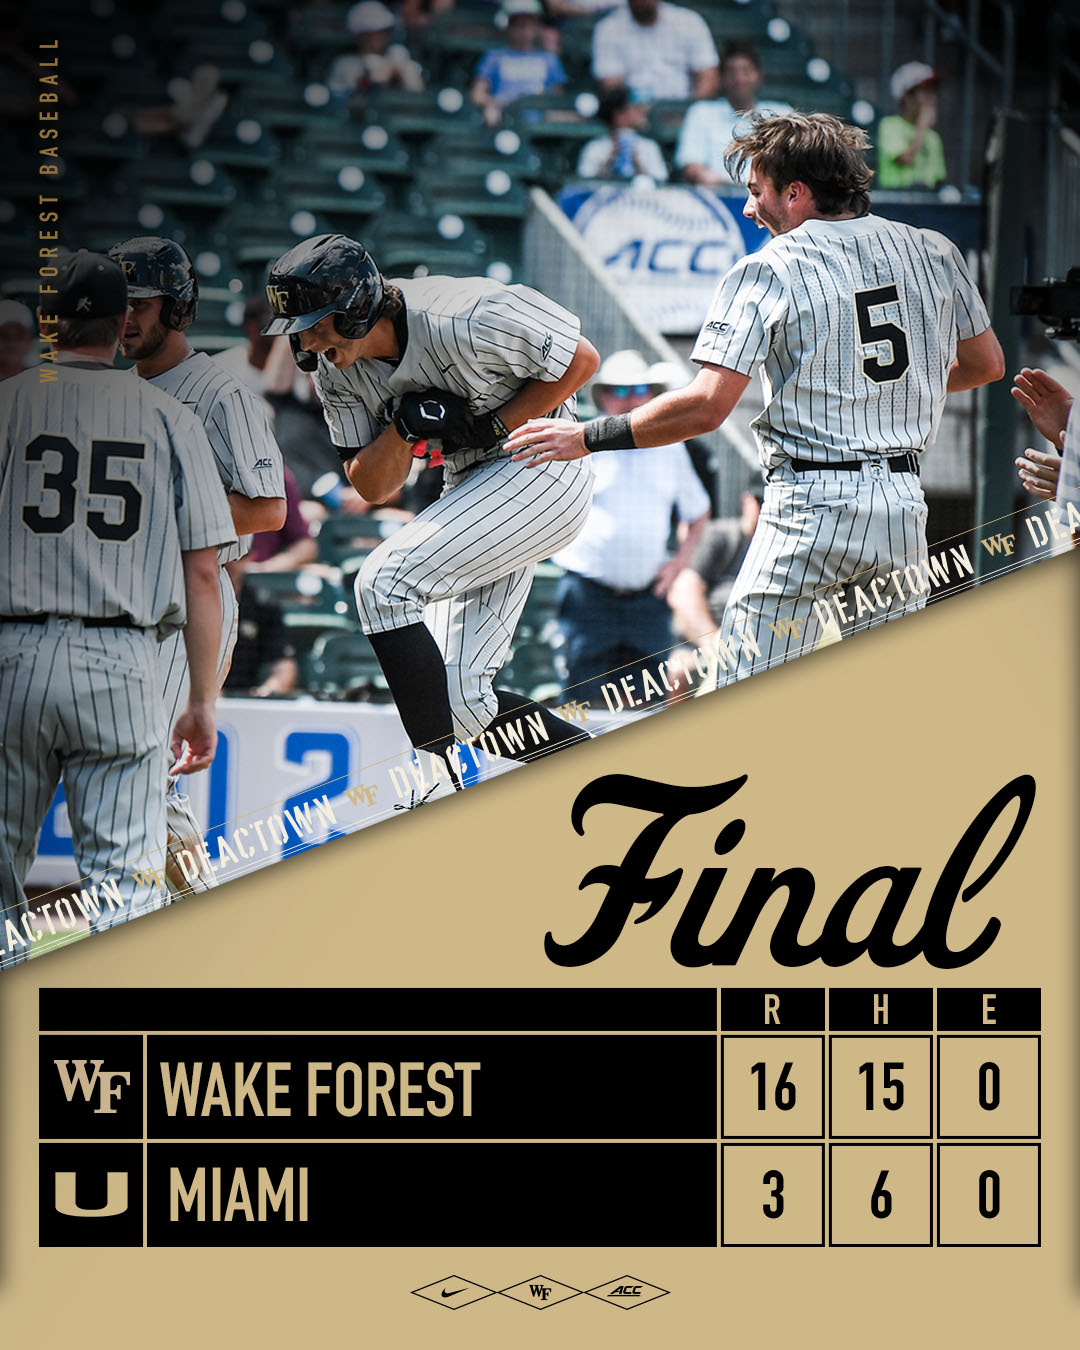 Wake Forest Baseball on Twitter home with win 40! https//t